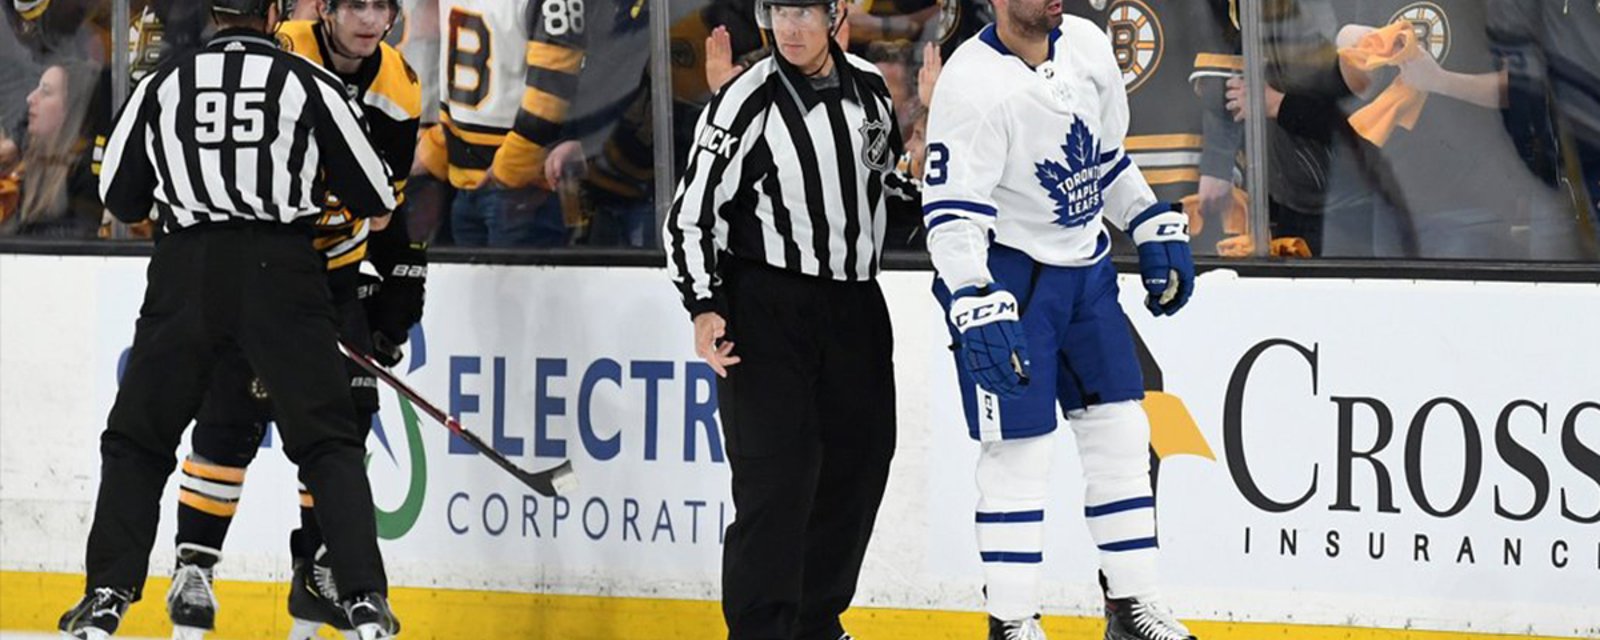 Report: Referees from Game 2 of Leafs/Bruins series have been reprimanded